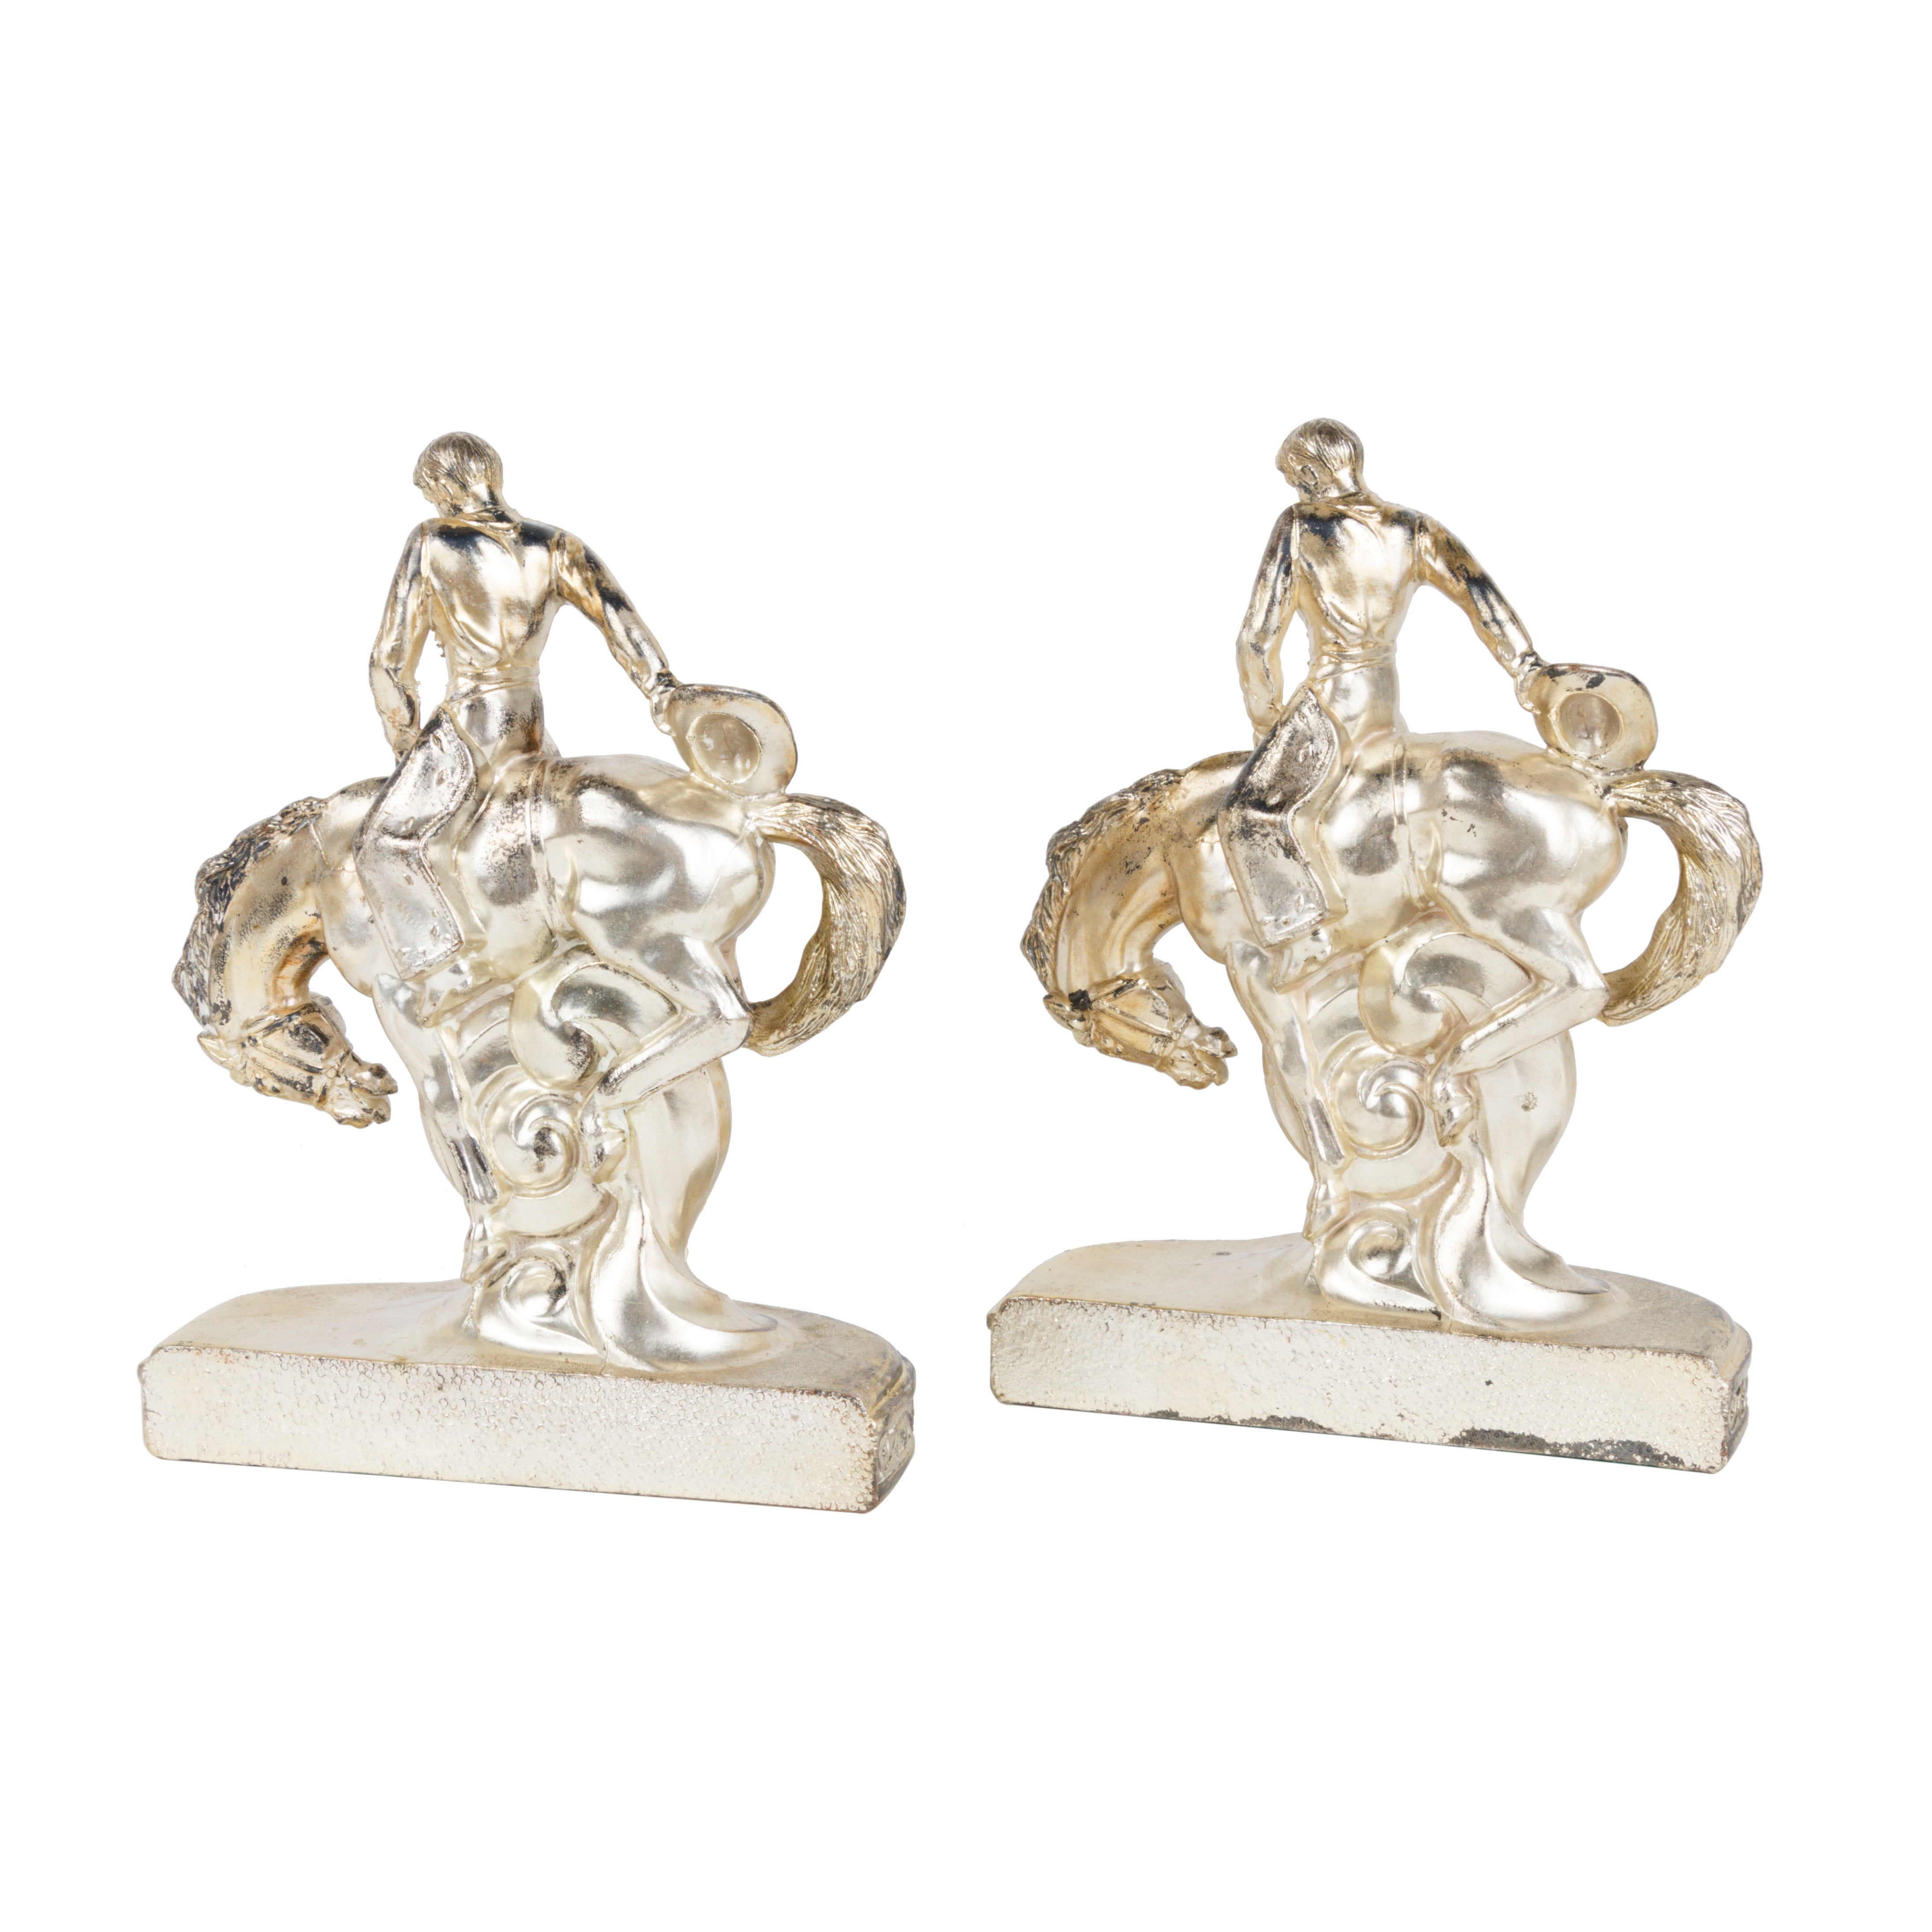 Bucking Bronco Bookends